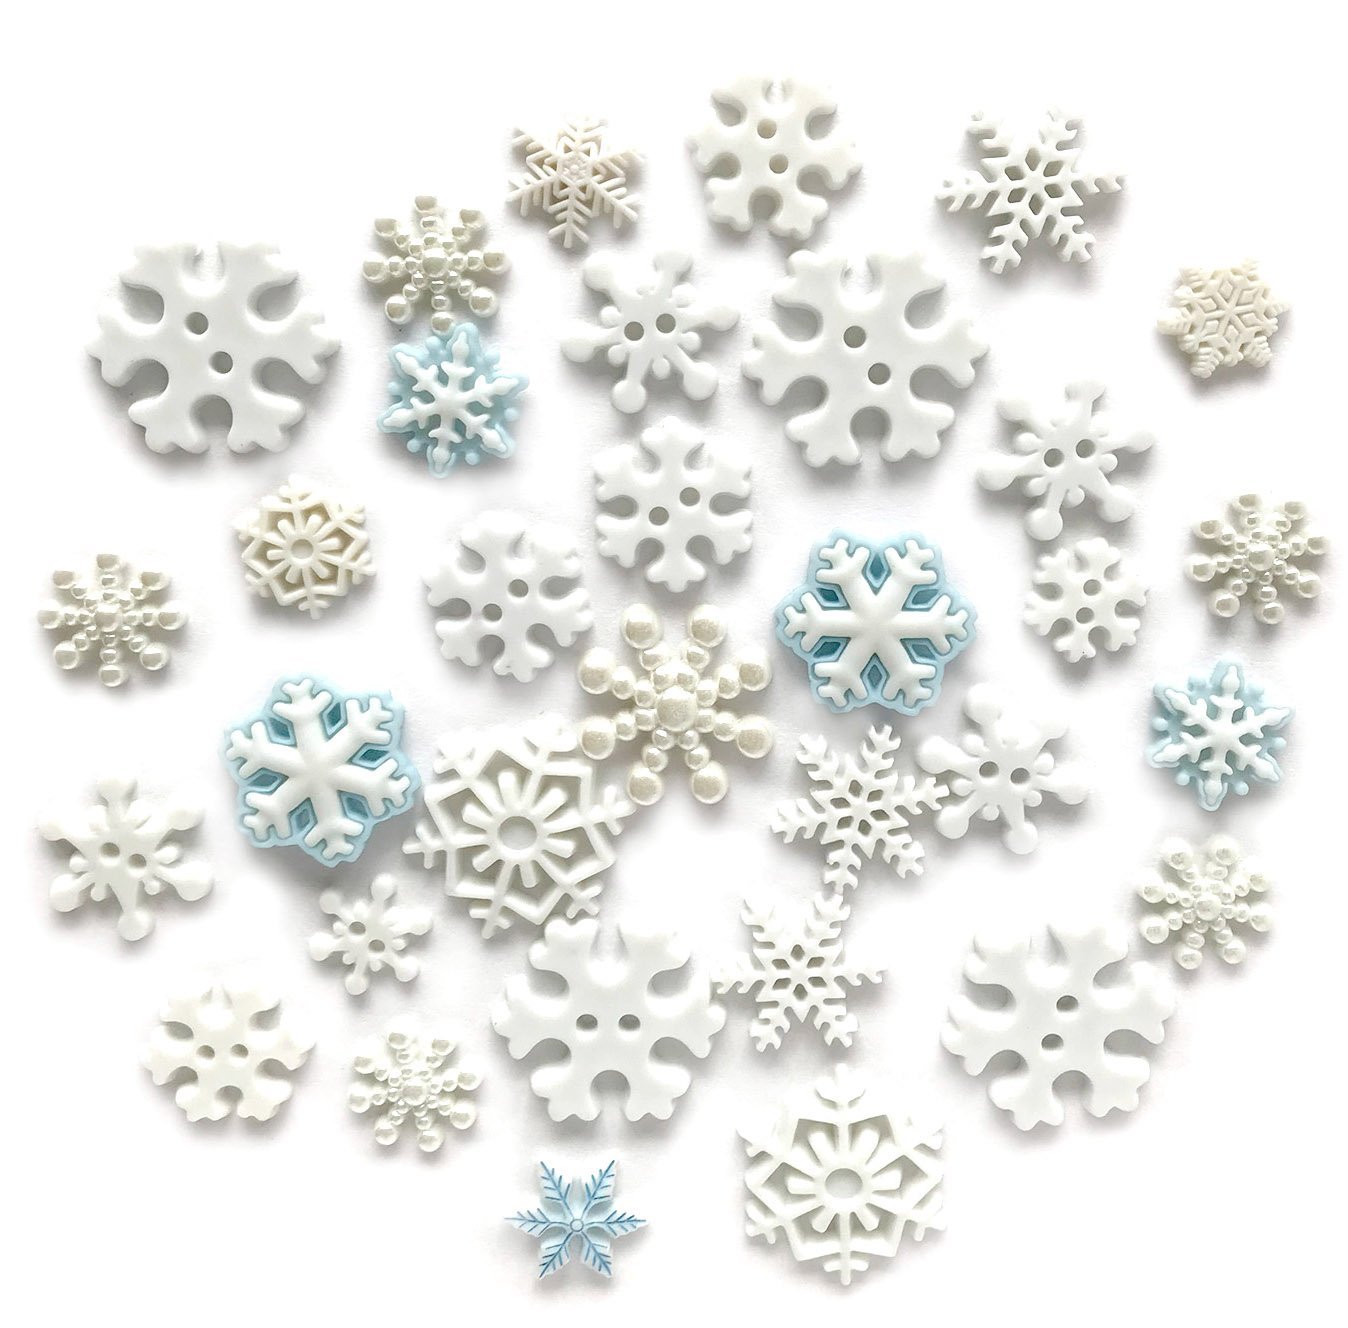 Buttons Galore 100 Snowflake Buttons - Super Value Pack for Craft